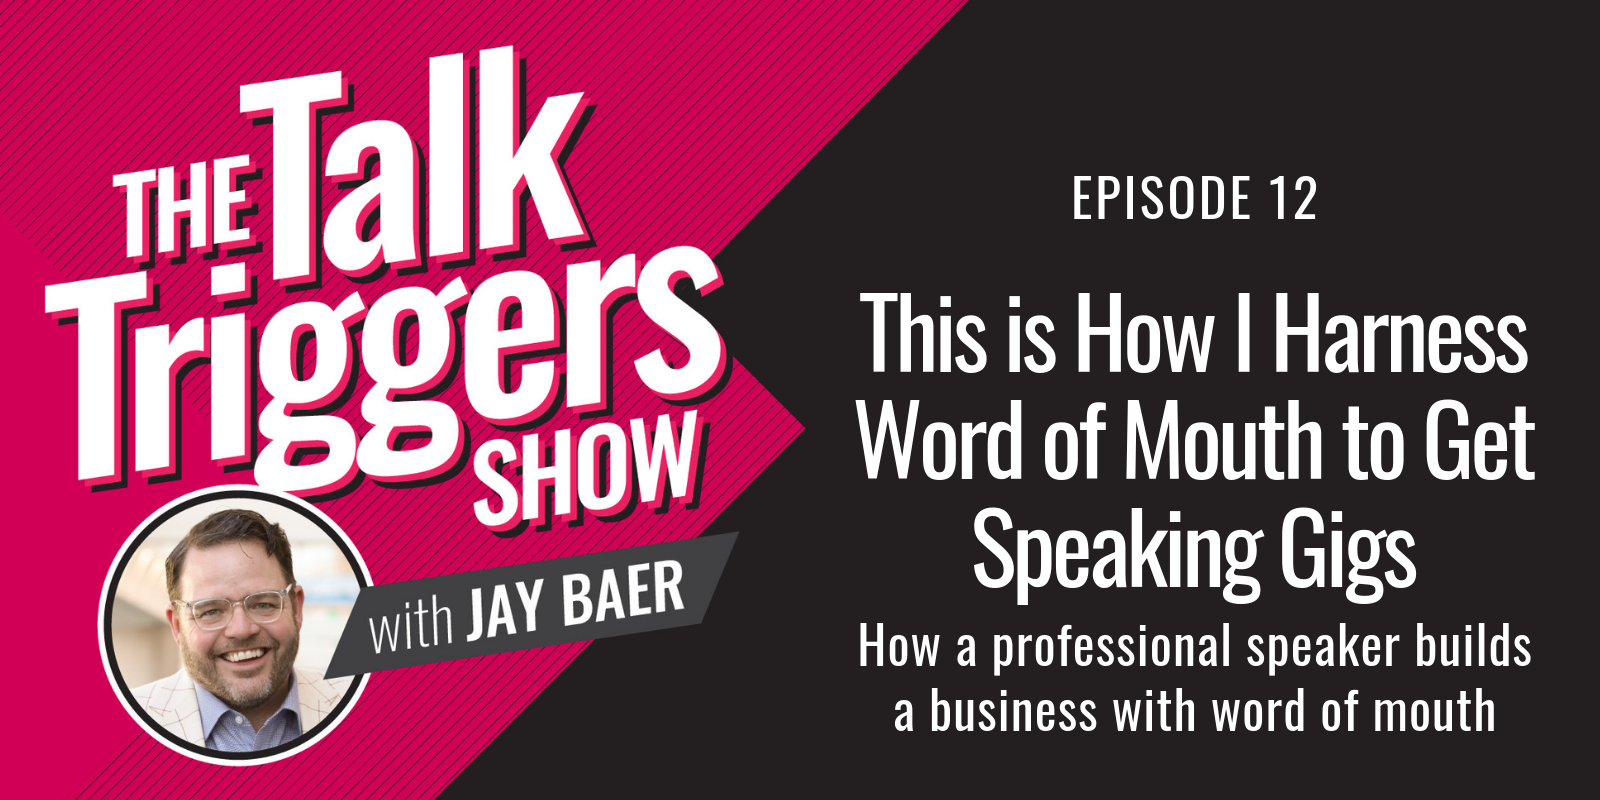 This is How I Harness Word of Mouth to Get Speaking Gigs